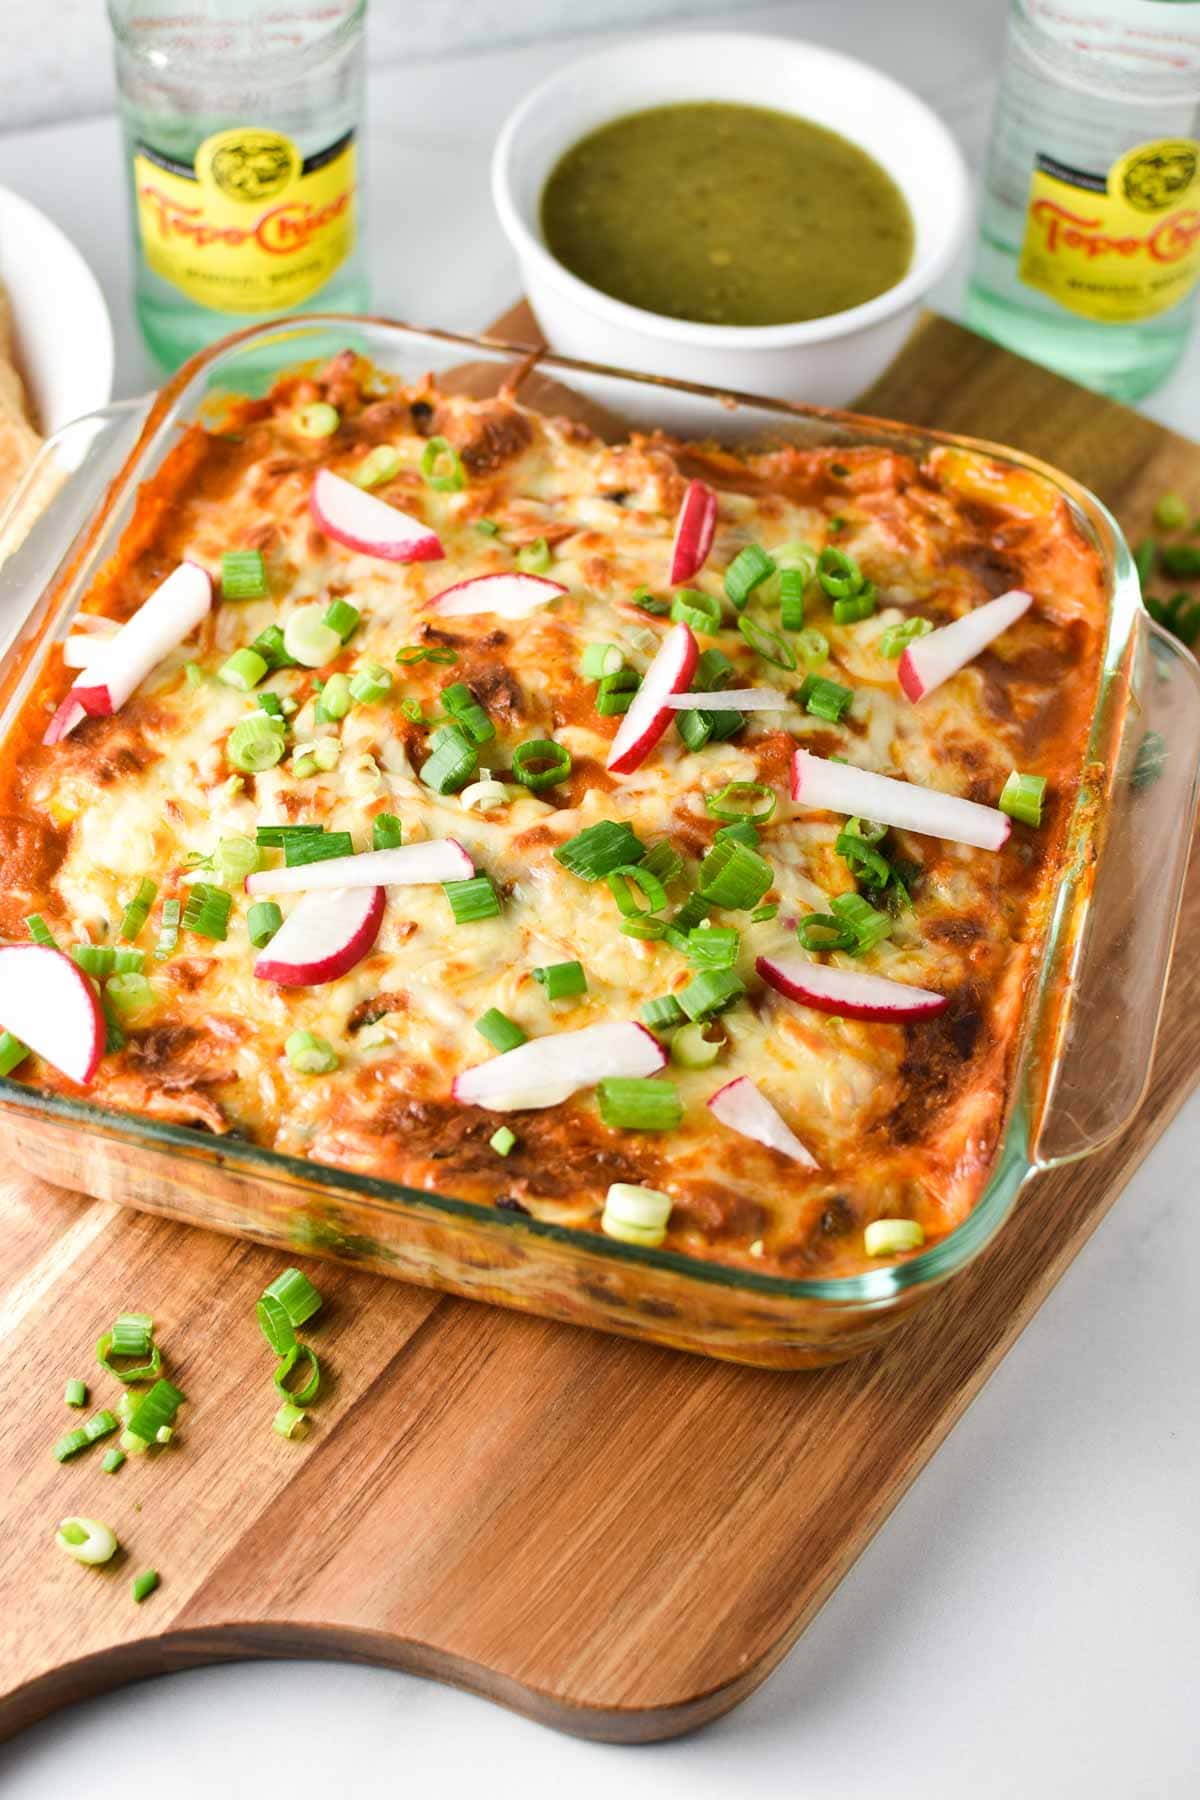 An up close view of an enchilada casserole with melted cheese, green onions, and radish on top.